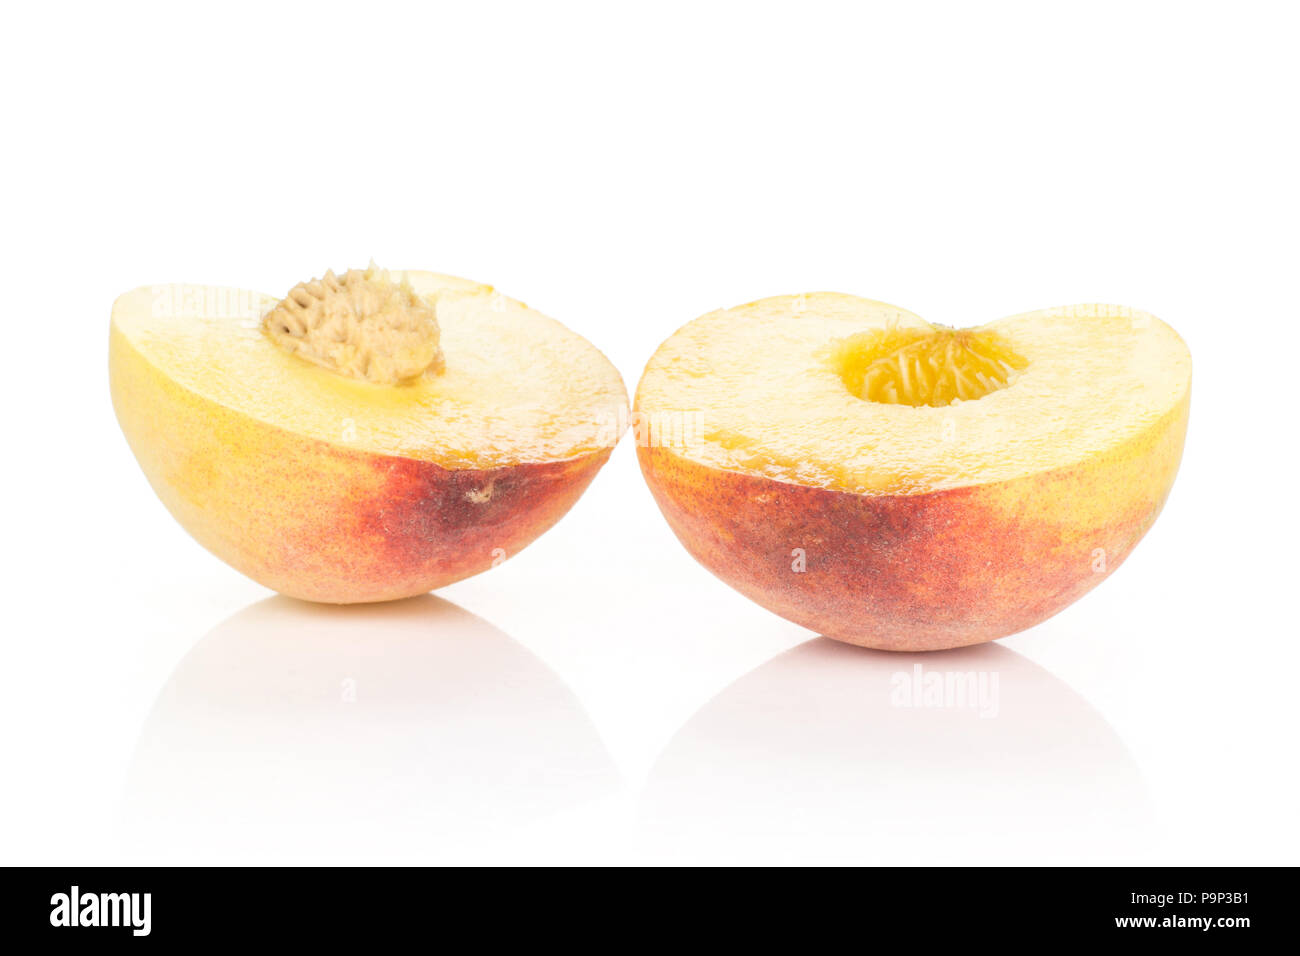 Two halves of yellow peach isolated on white background cross section with a drupe inside Stock Photo